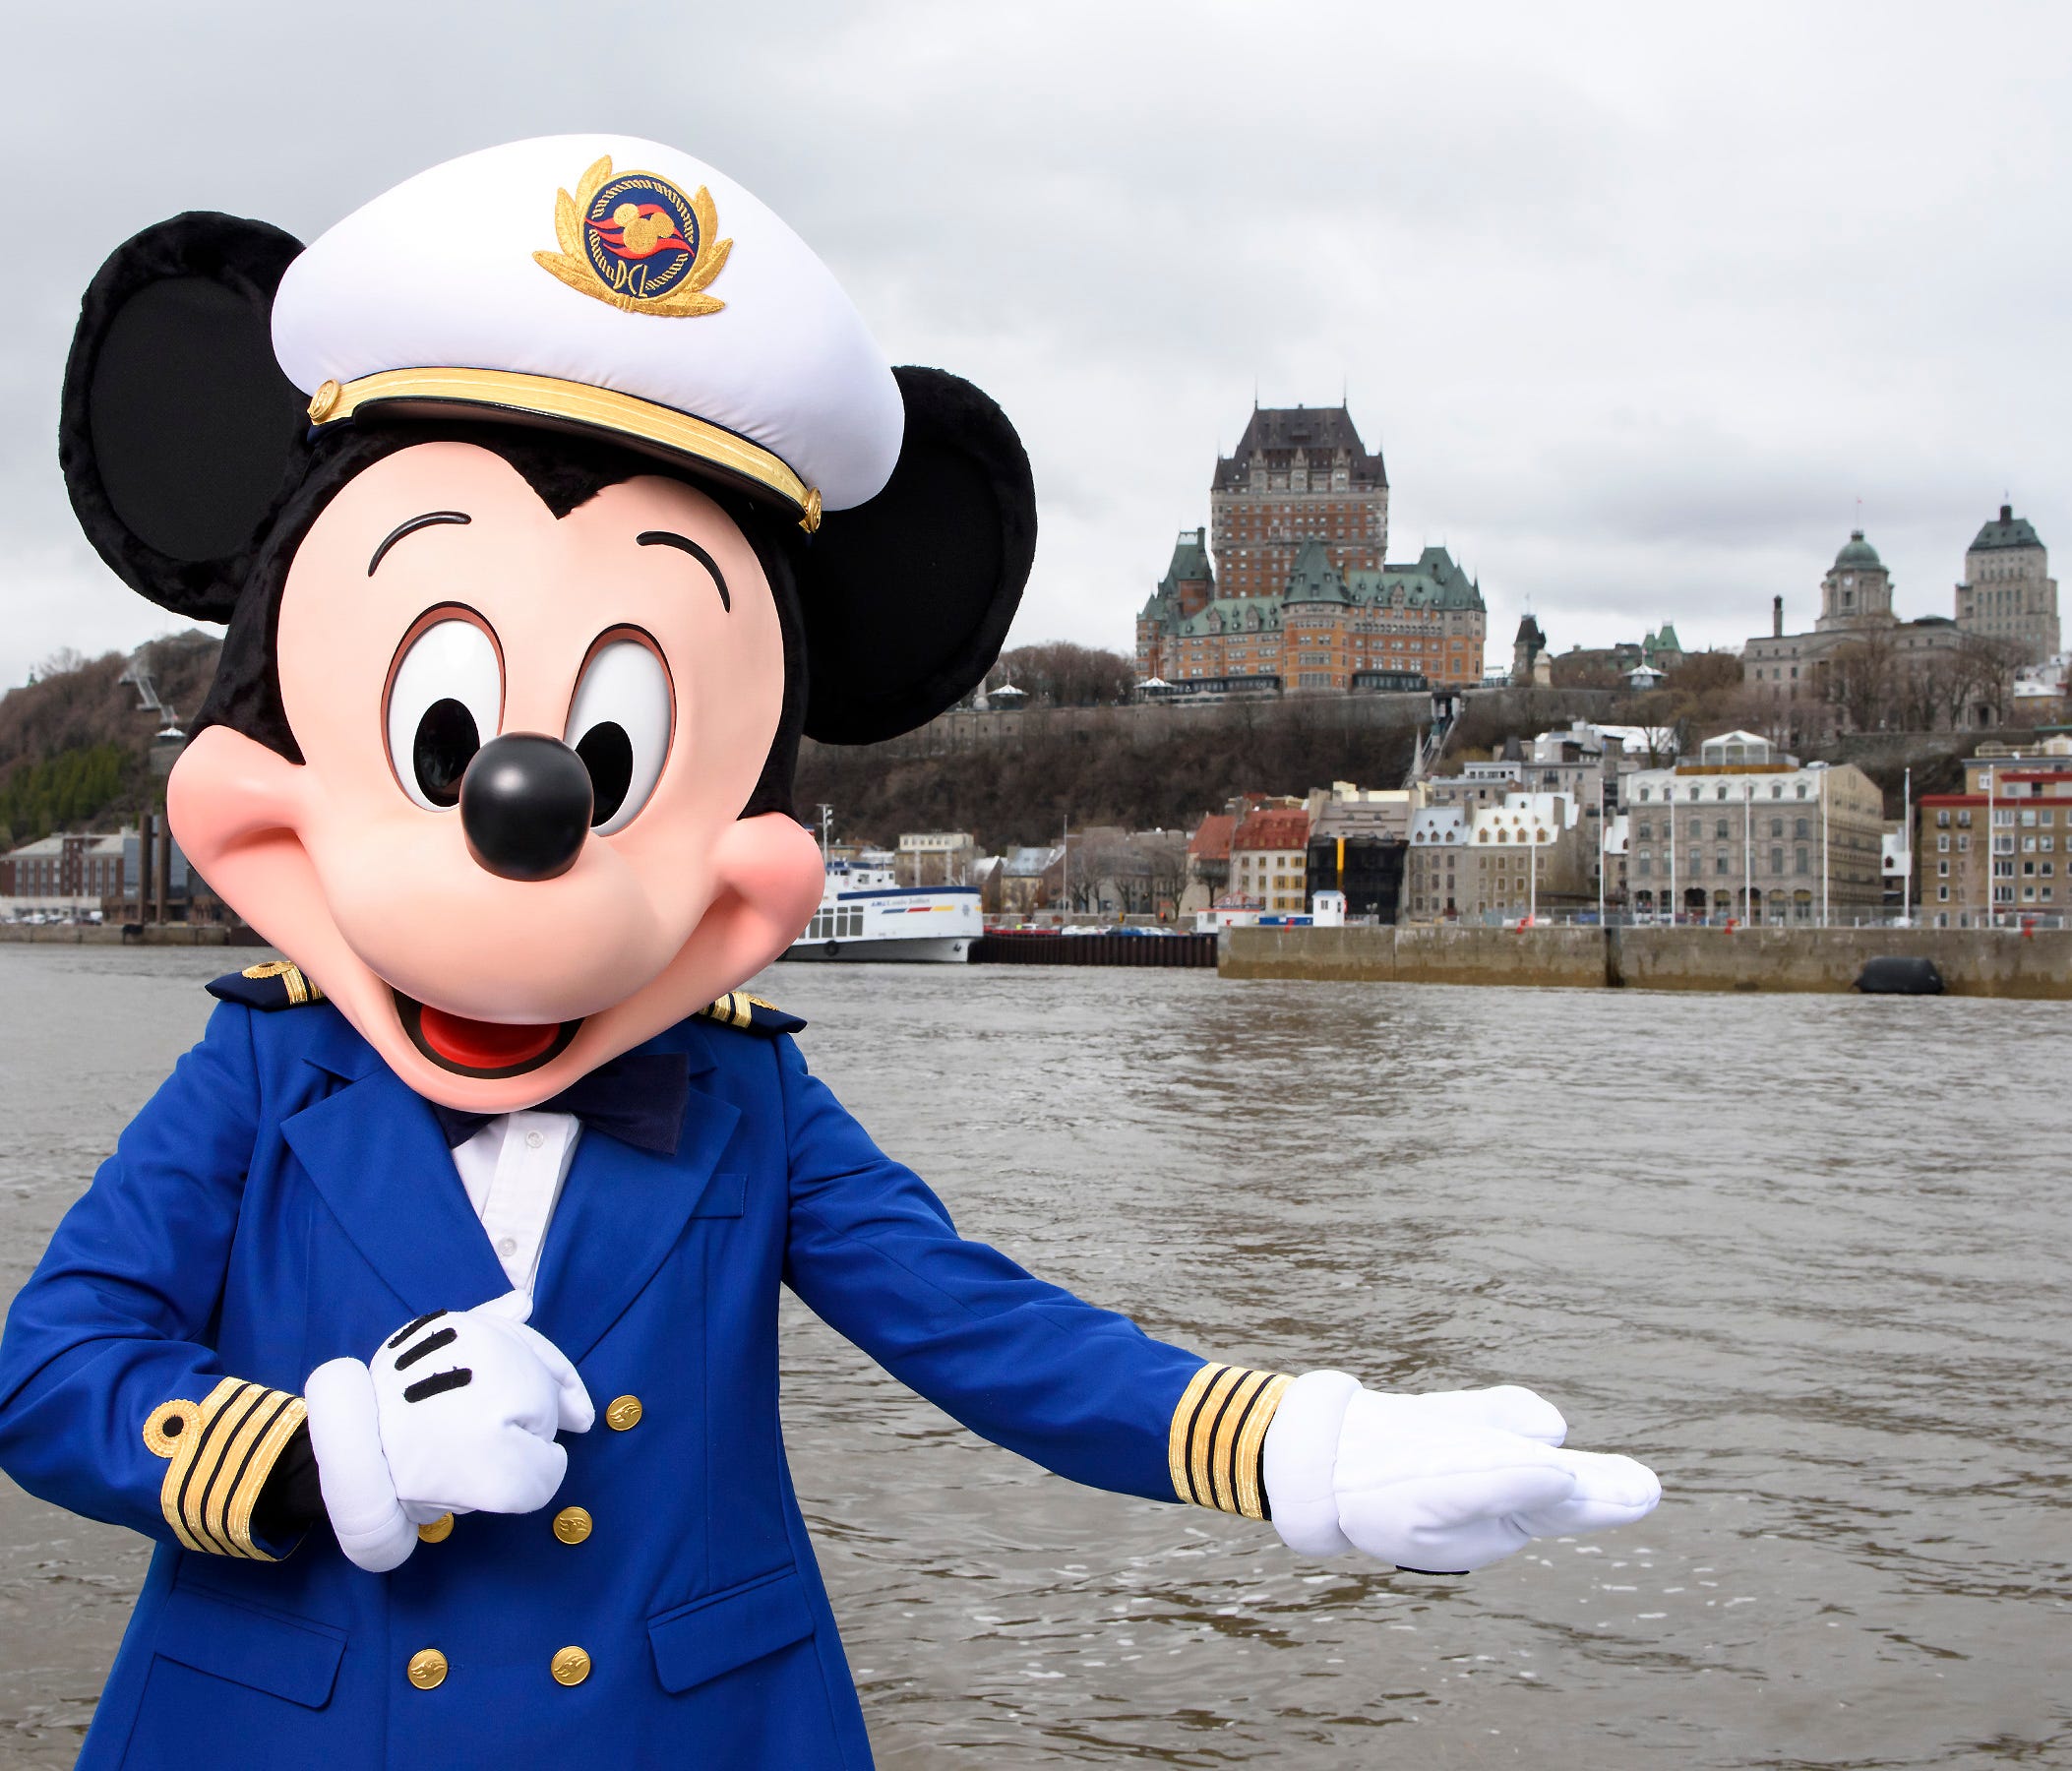 Disney Cruise Line will offer its first cruise to Quebec City, Canada in 2018.